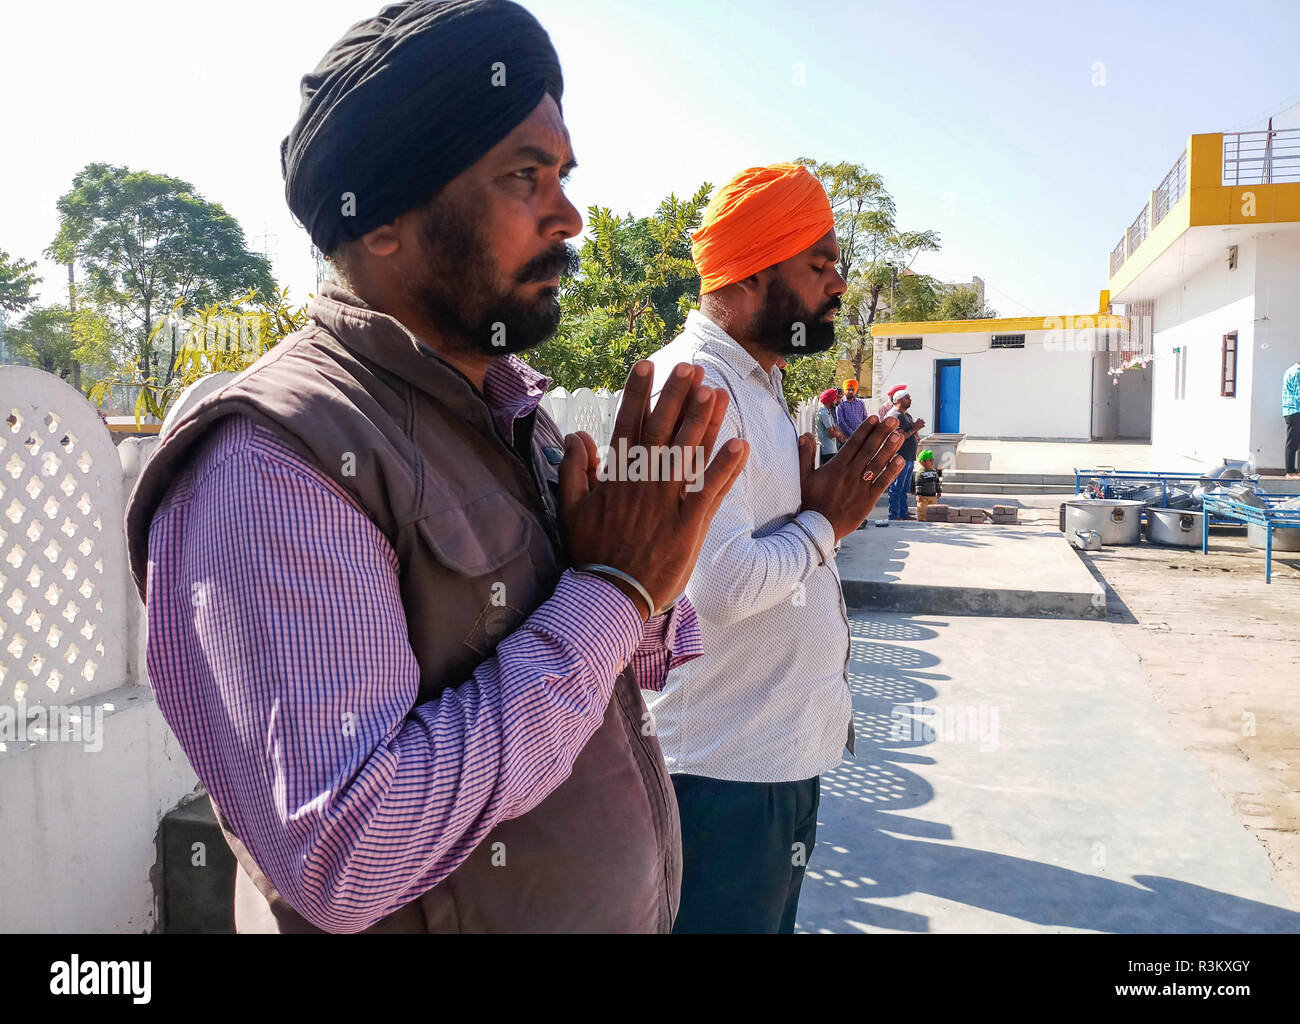 Sikh devotees are seen praying outside Gurdwara or a Sikh temple during the occasion of the 550th birth anniversary of Guru Nanak Dev in Mohali. Sikhism was founded in the 15th century by Guru Nanak, who broke away from Hinduism, India’s dominant religion, He preached the equality of races and genders and the rejection of image-worship and the caste system. Stock Photo